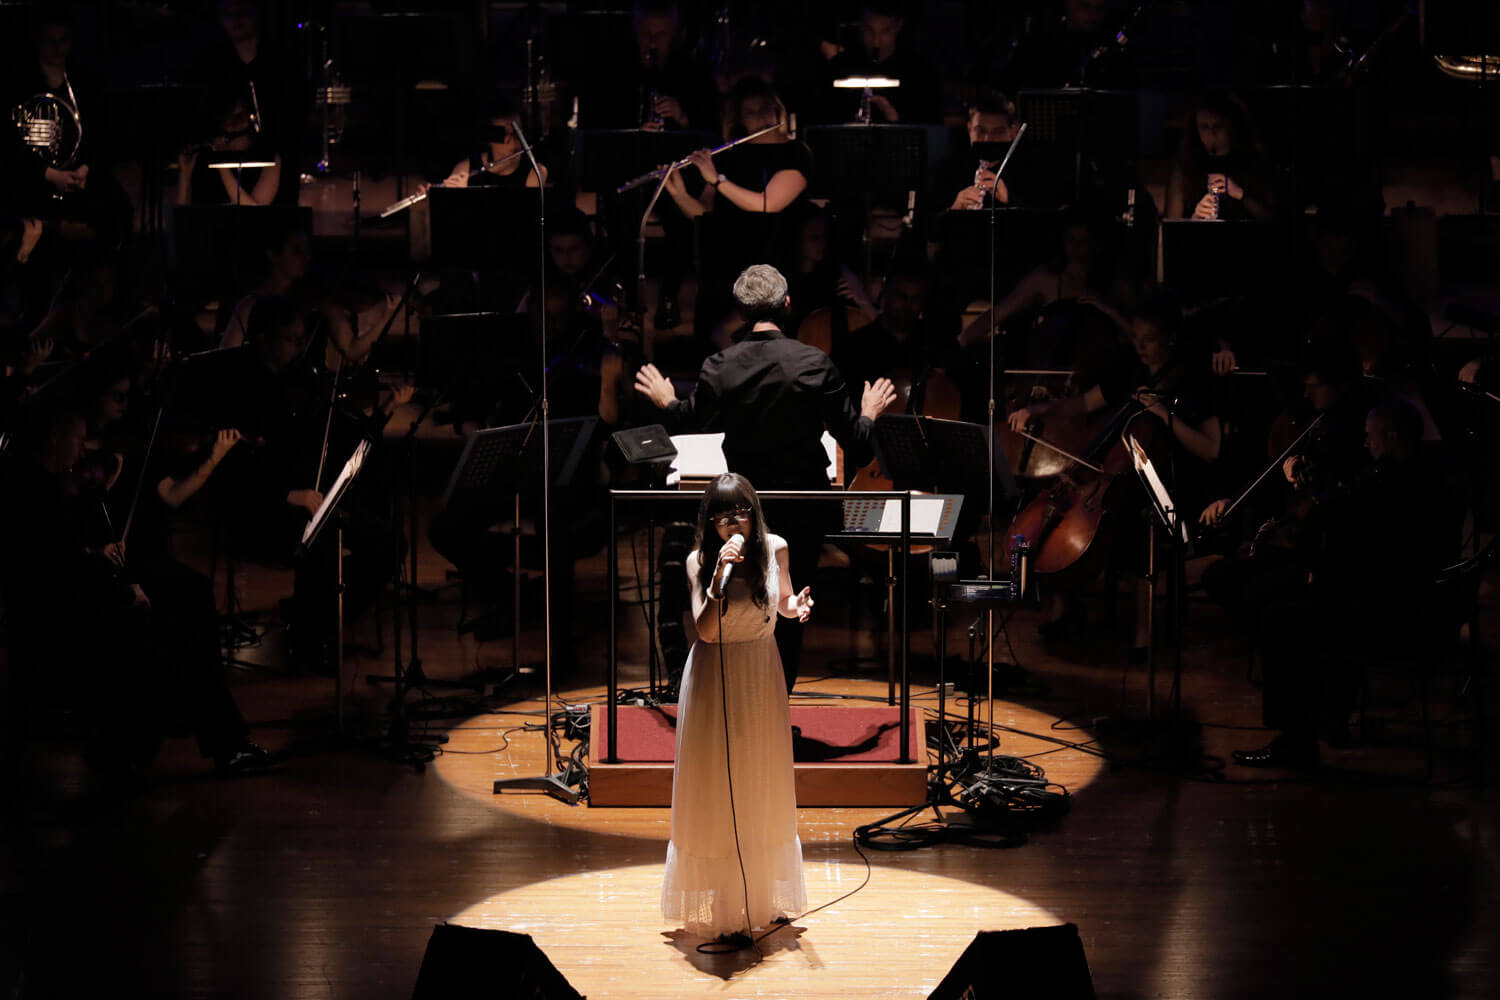 Aimer's Full Orchestra Concert at Bunkamura Orchard Hall to be Released